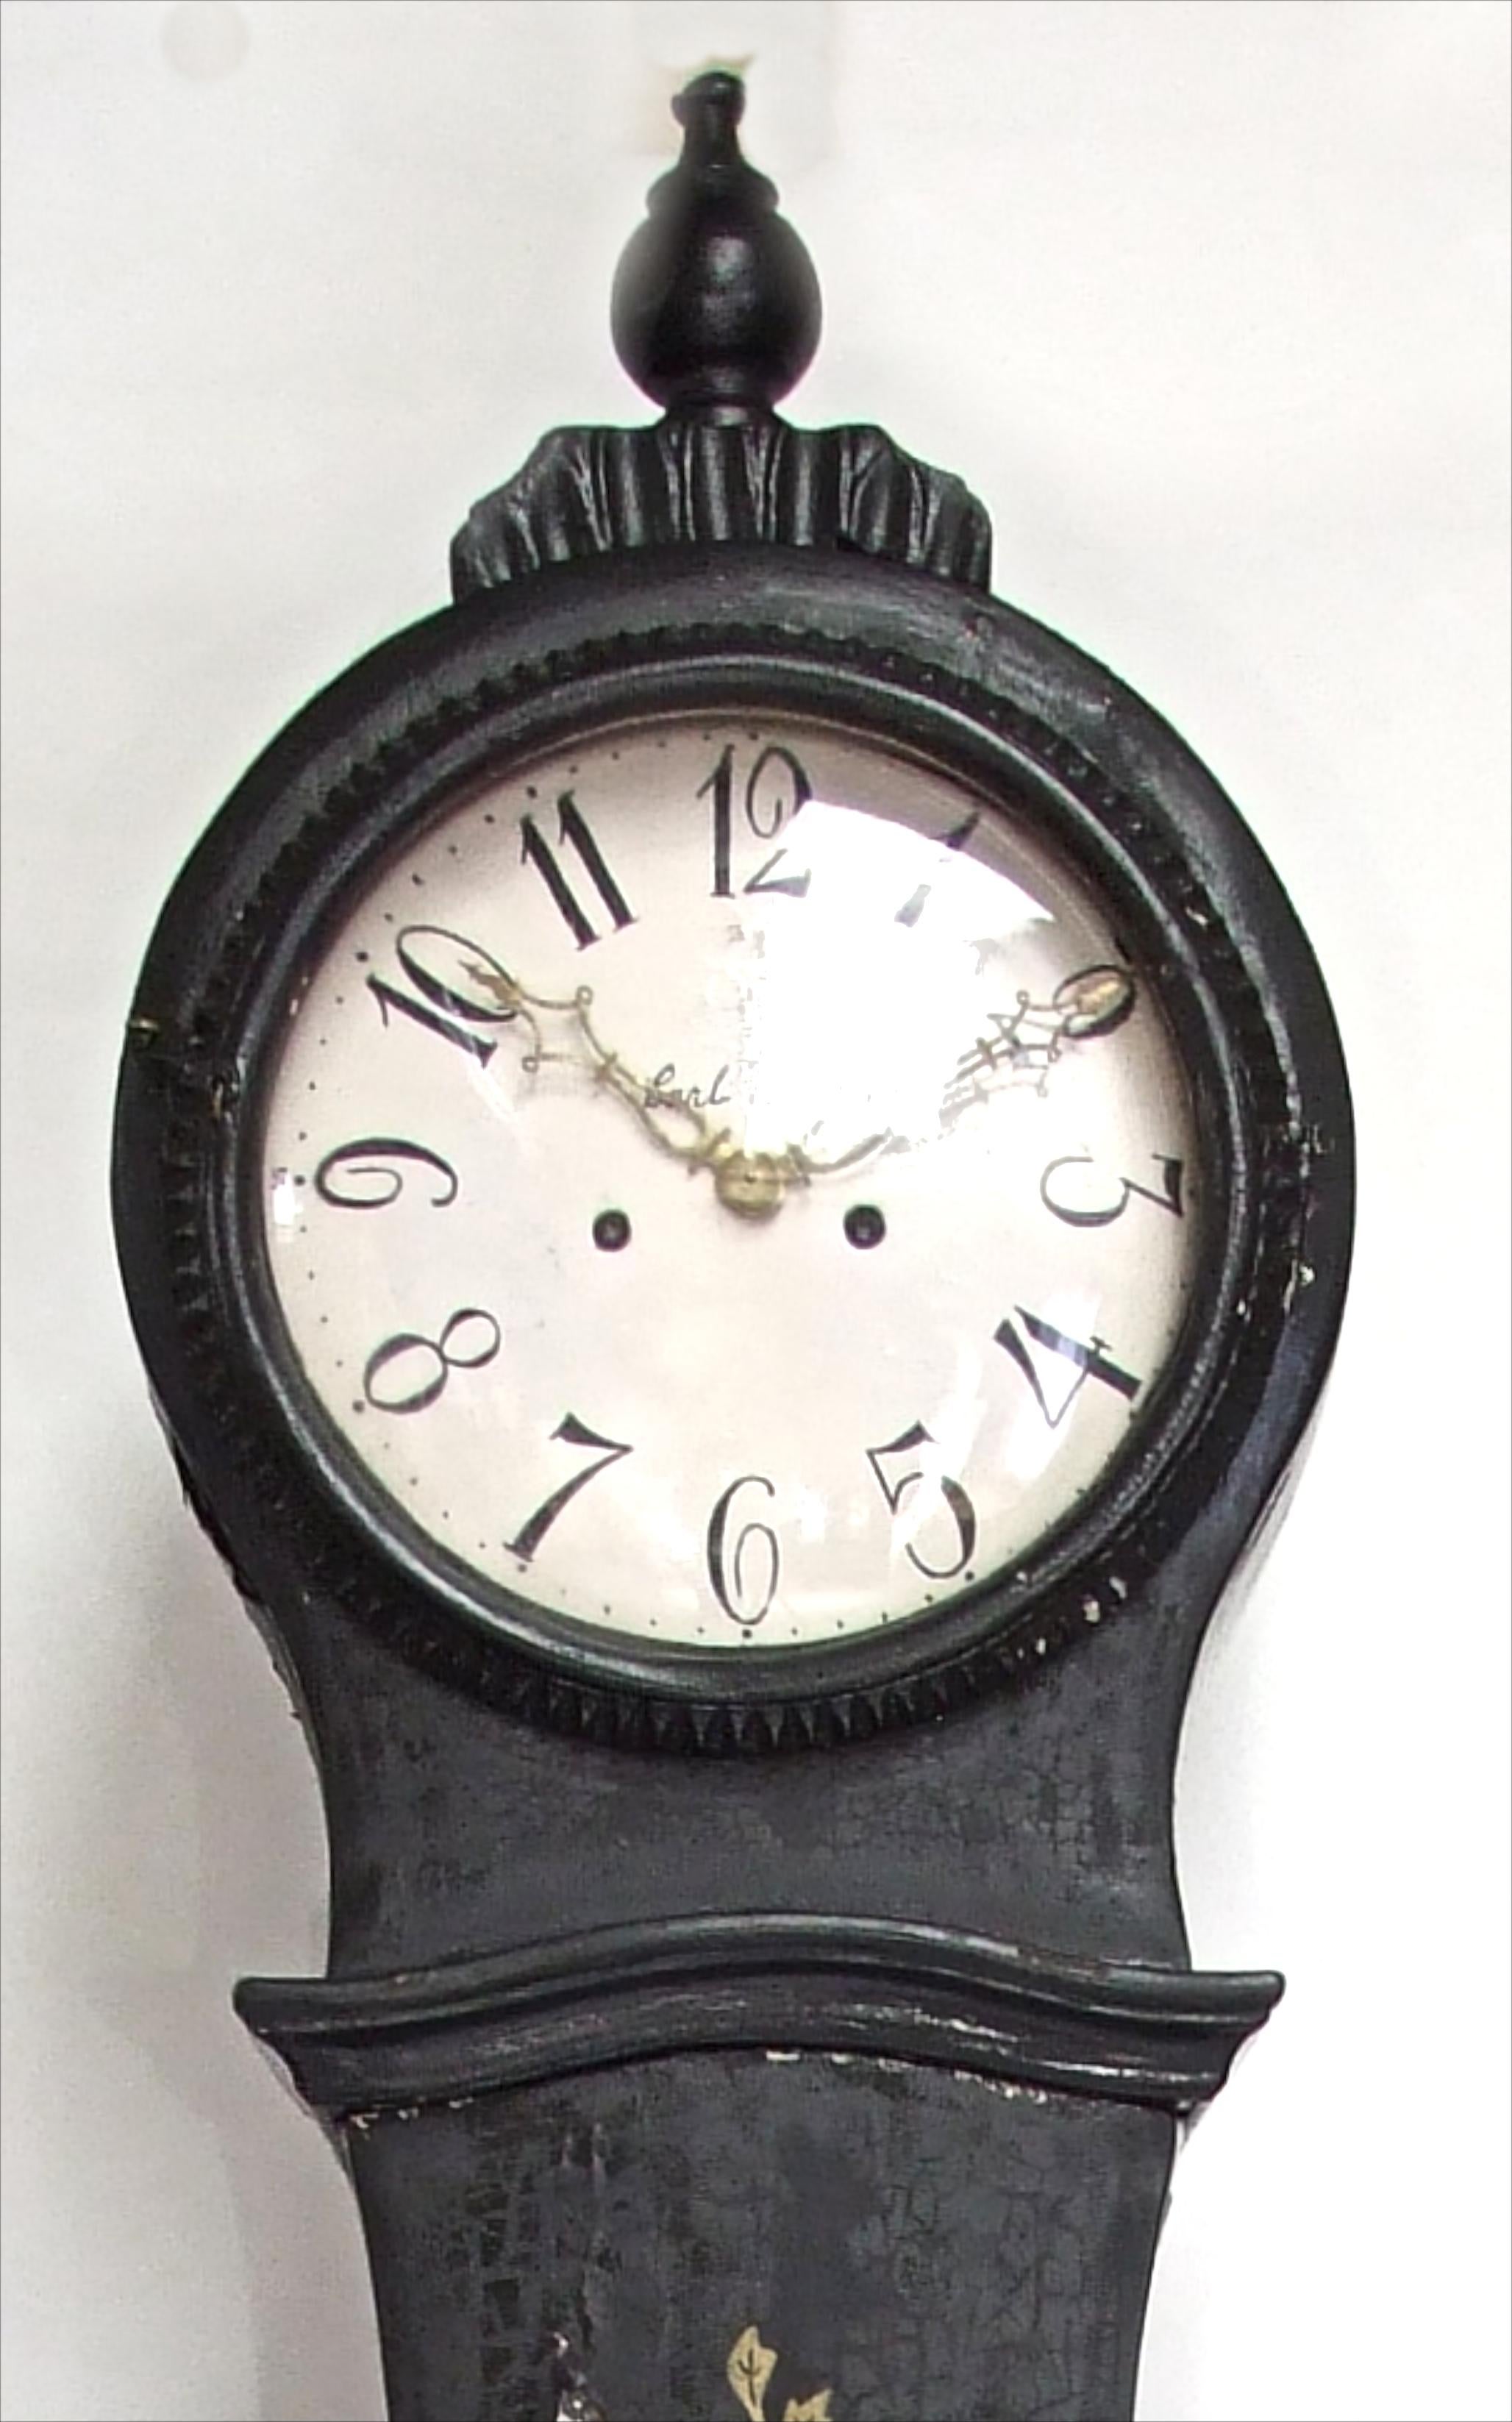 Antique Swedish Mora clock from early 1800s in original black paint with hand painted gold designs and decorative feet and a good face

The clock body paint has the usual wood movement and paint distressing found in clocks of this age. 

We will